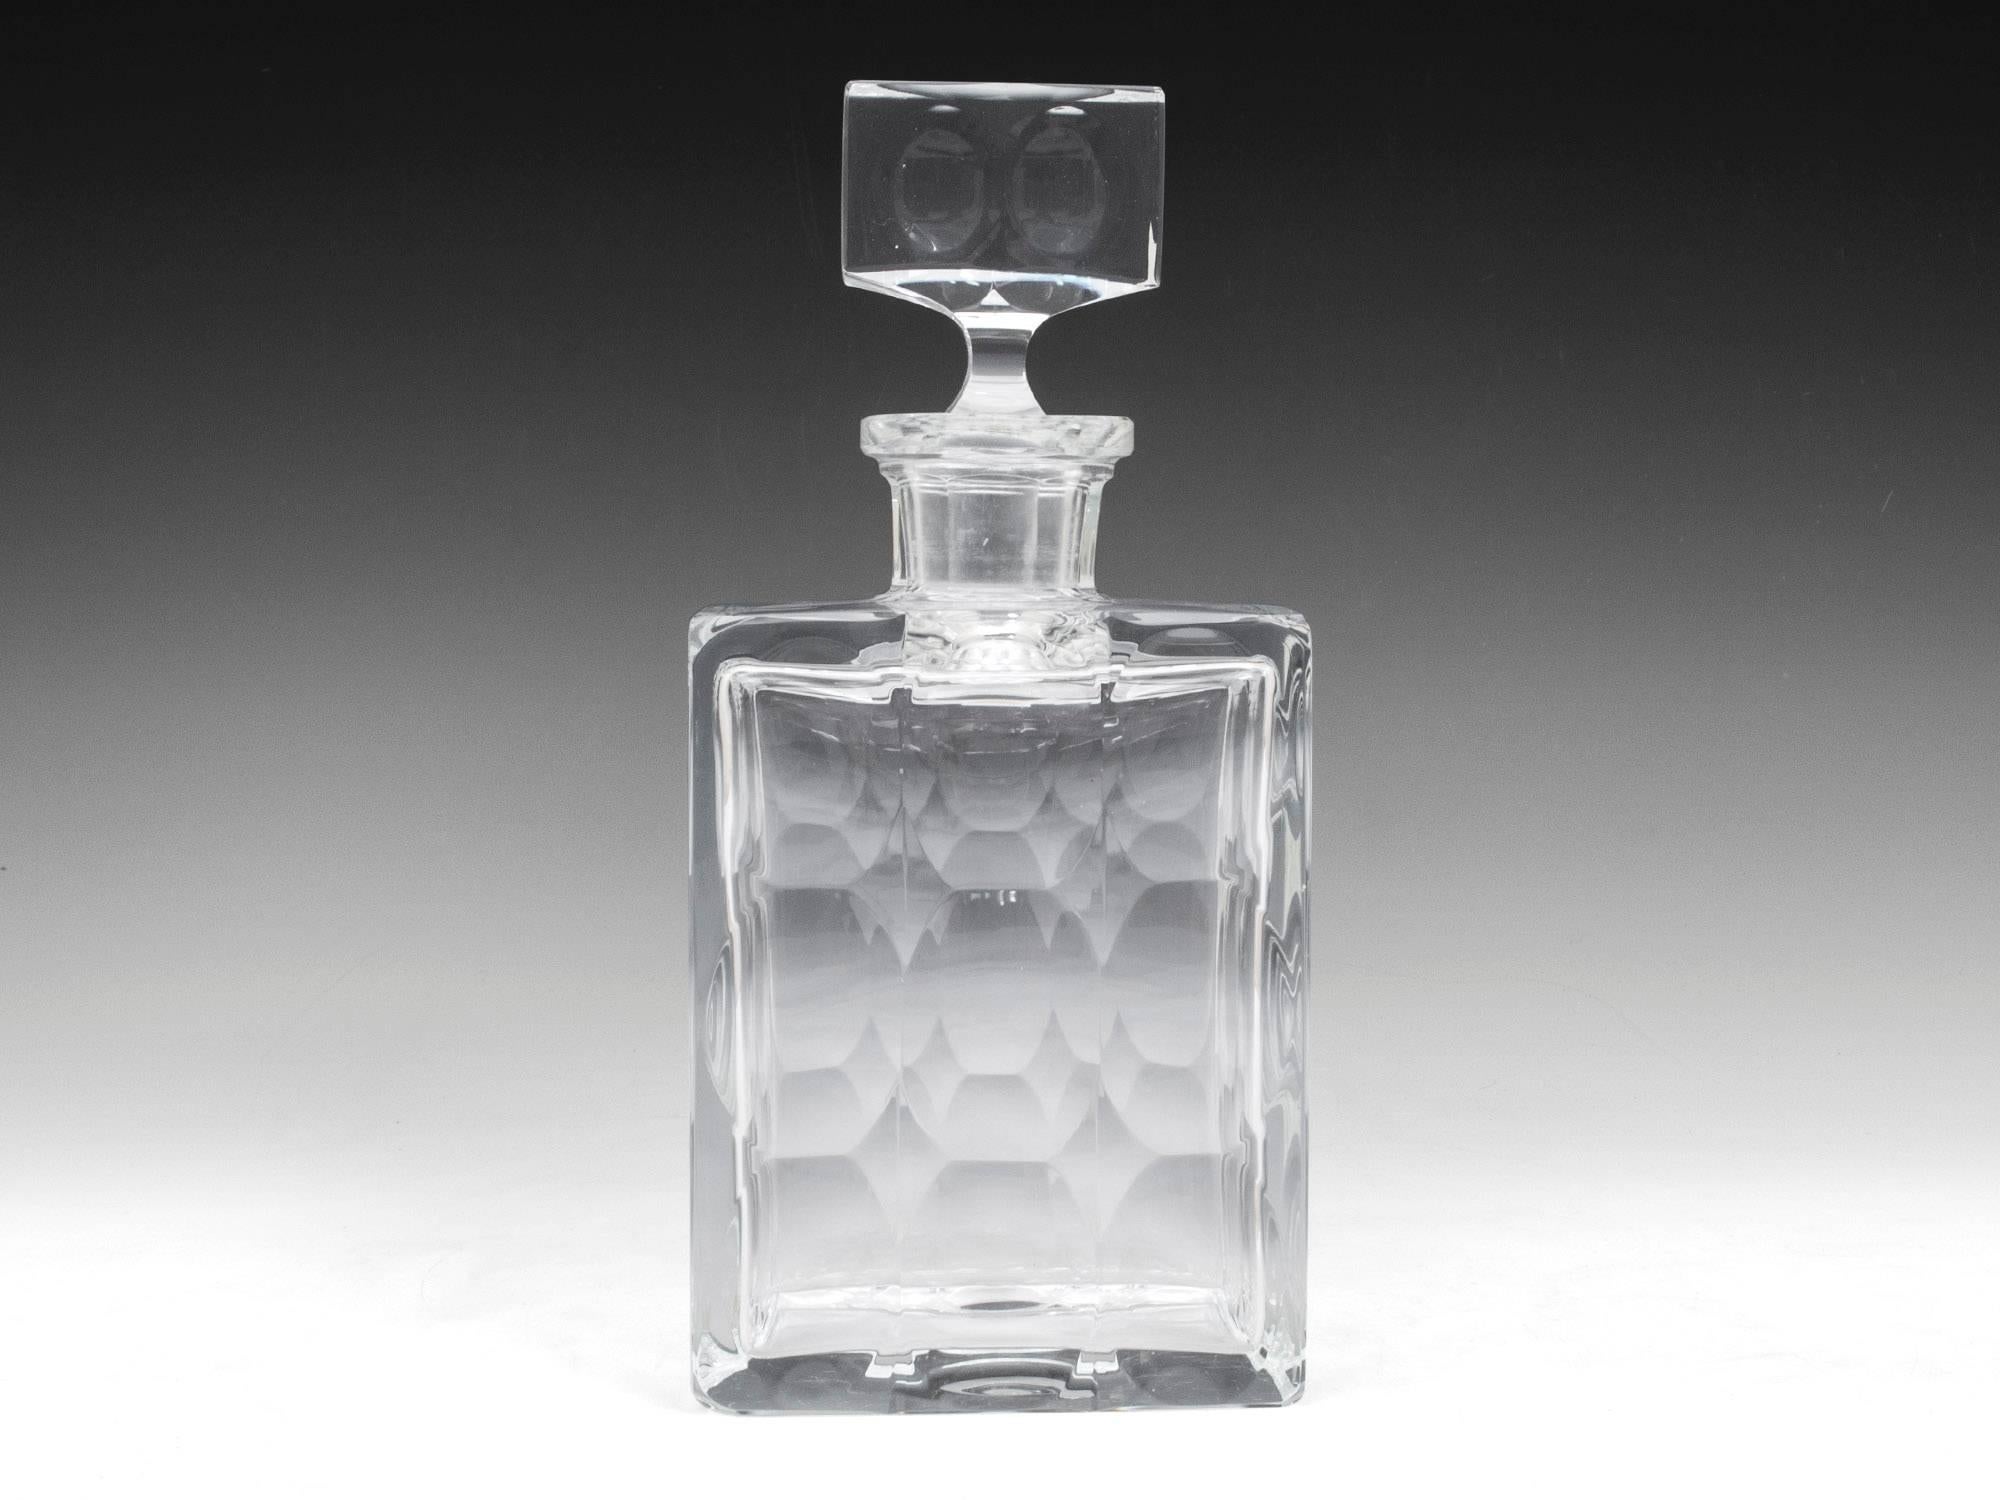 Large eye catching Whiskey Decanter with unusual decorative oval dimple cuts. Complete with faceted stopper. The base is marked Moser 

Moser glass is made by a Bohemian (Czechoslovakian) glasshouse founded by Ludwig Moser in 1857 

Shipping